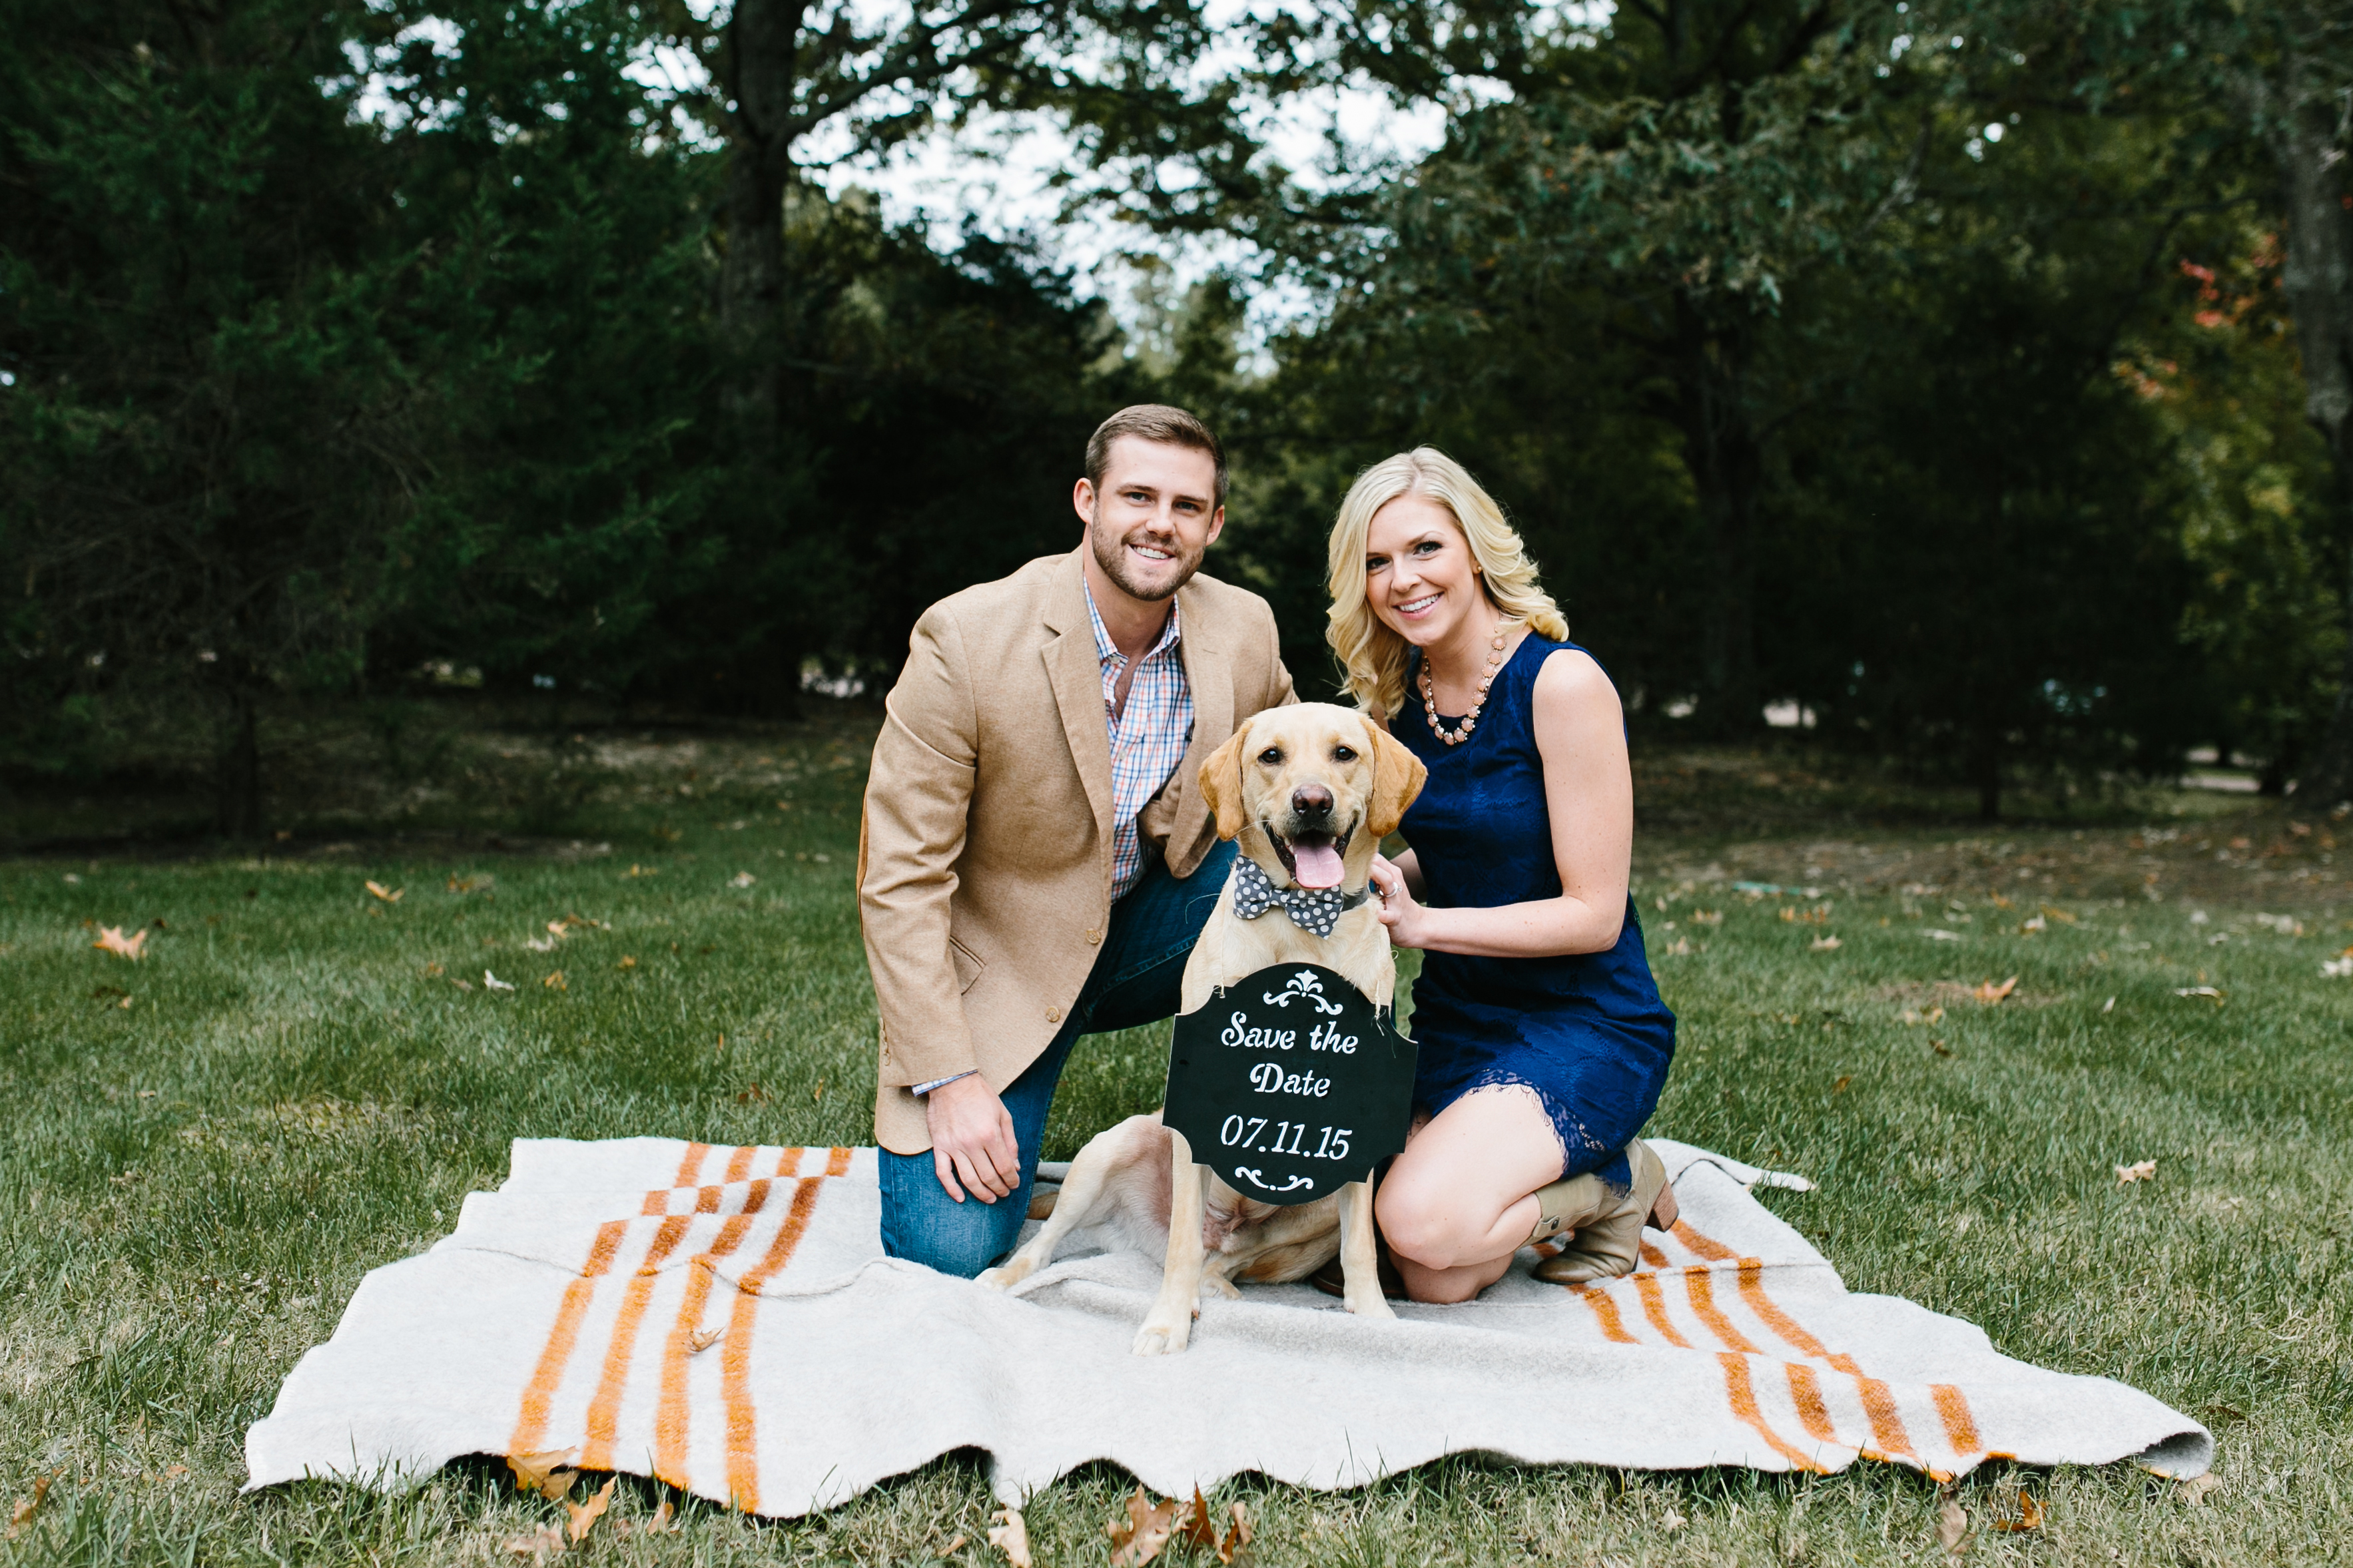 engagement photos with dog. wedding with a dog. save the date with a dog. save the date